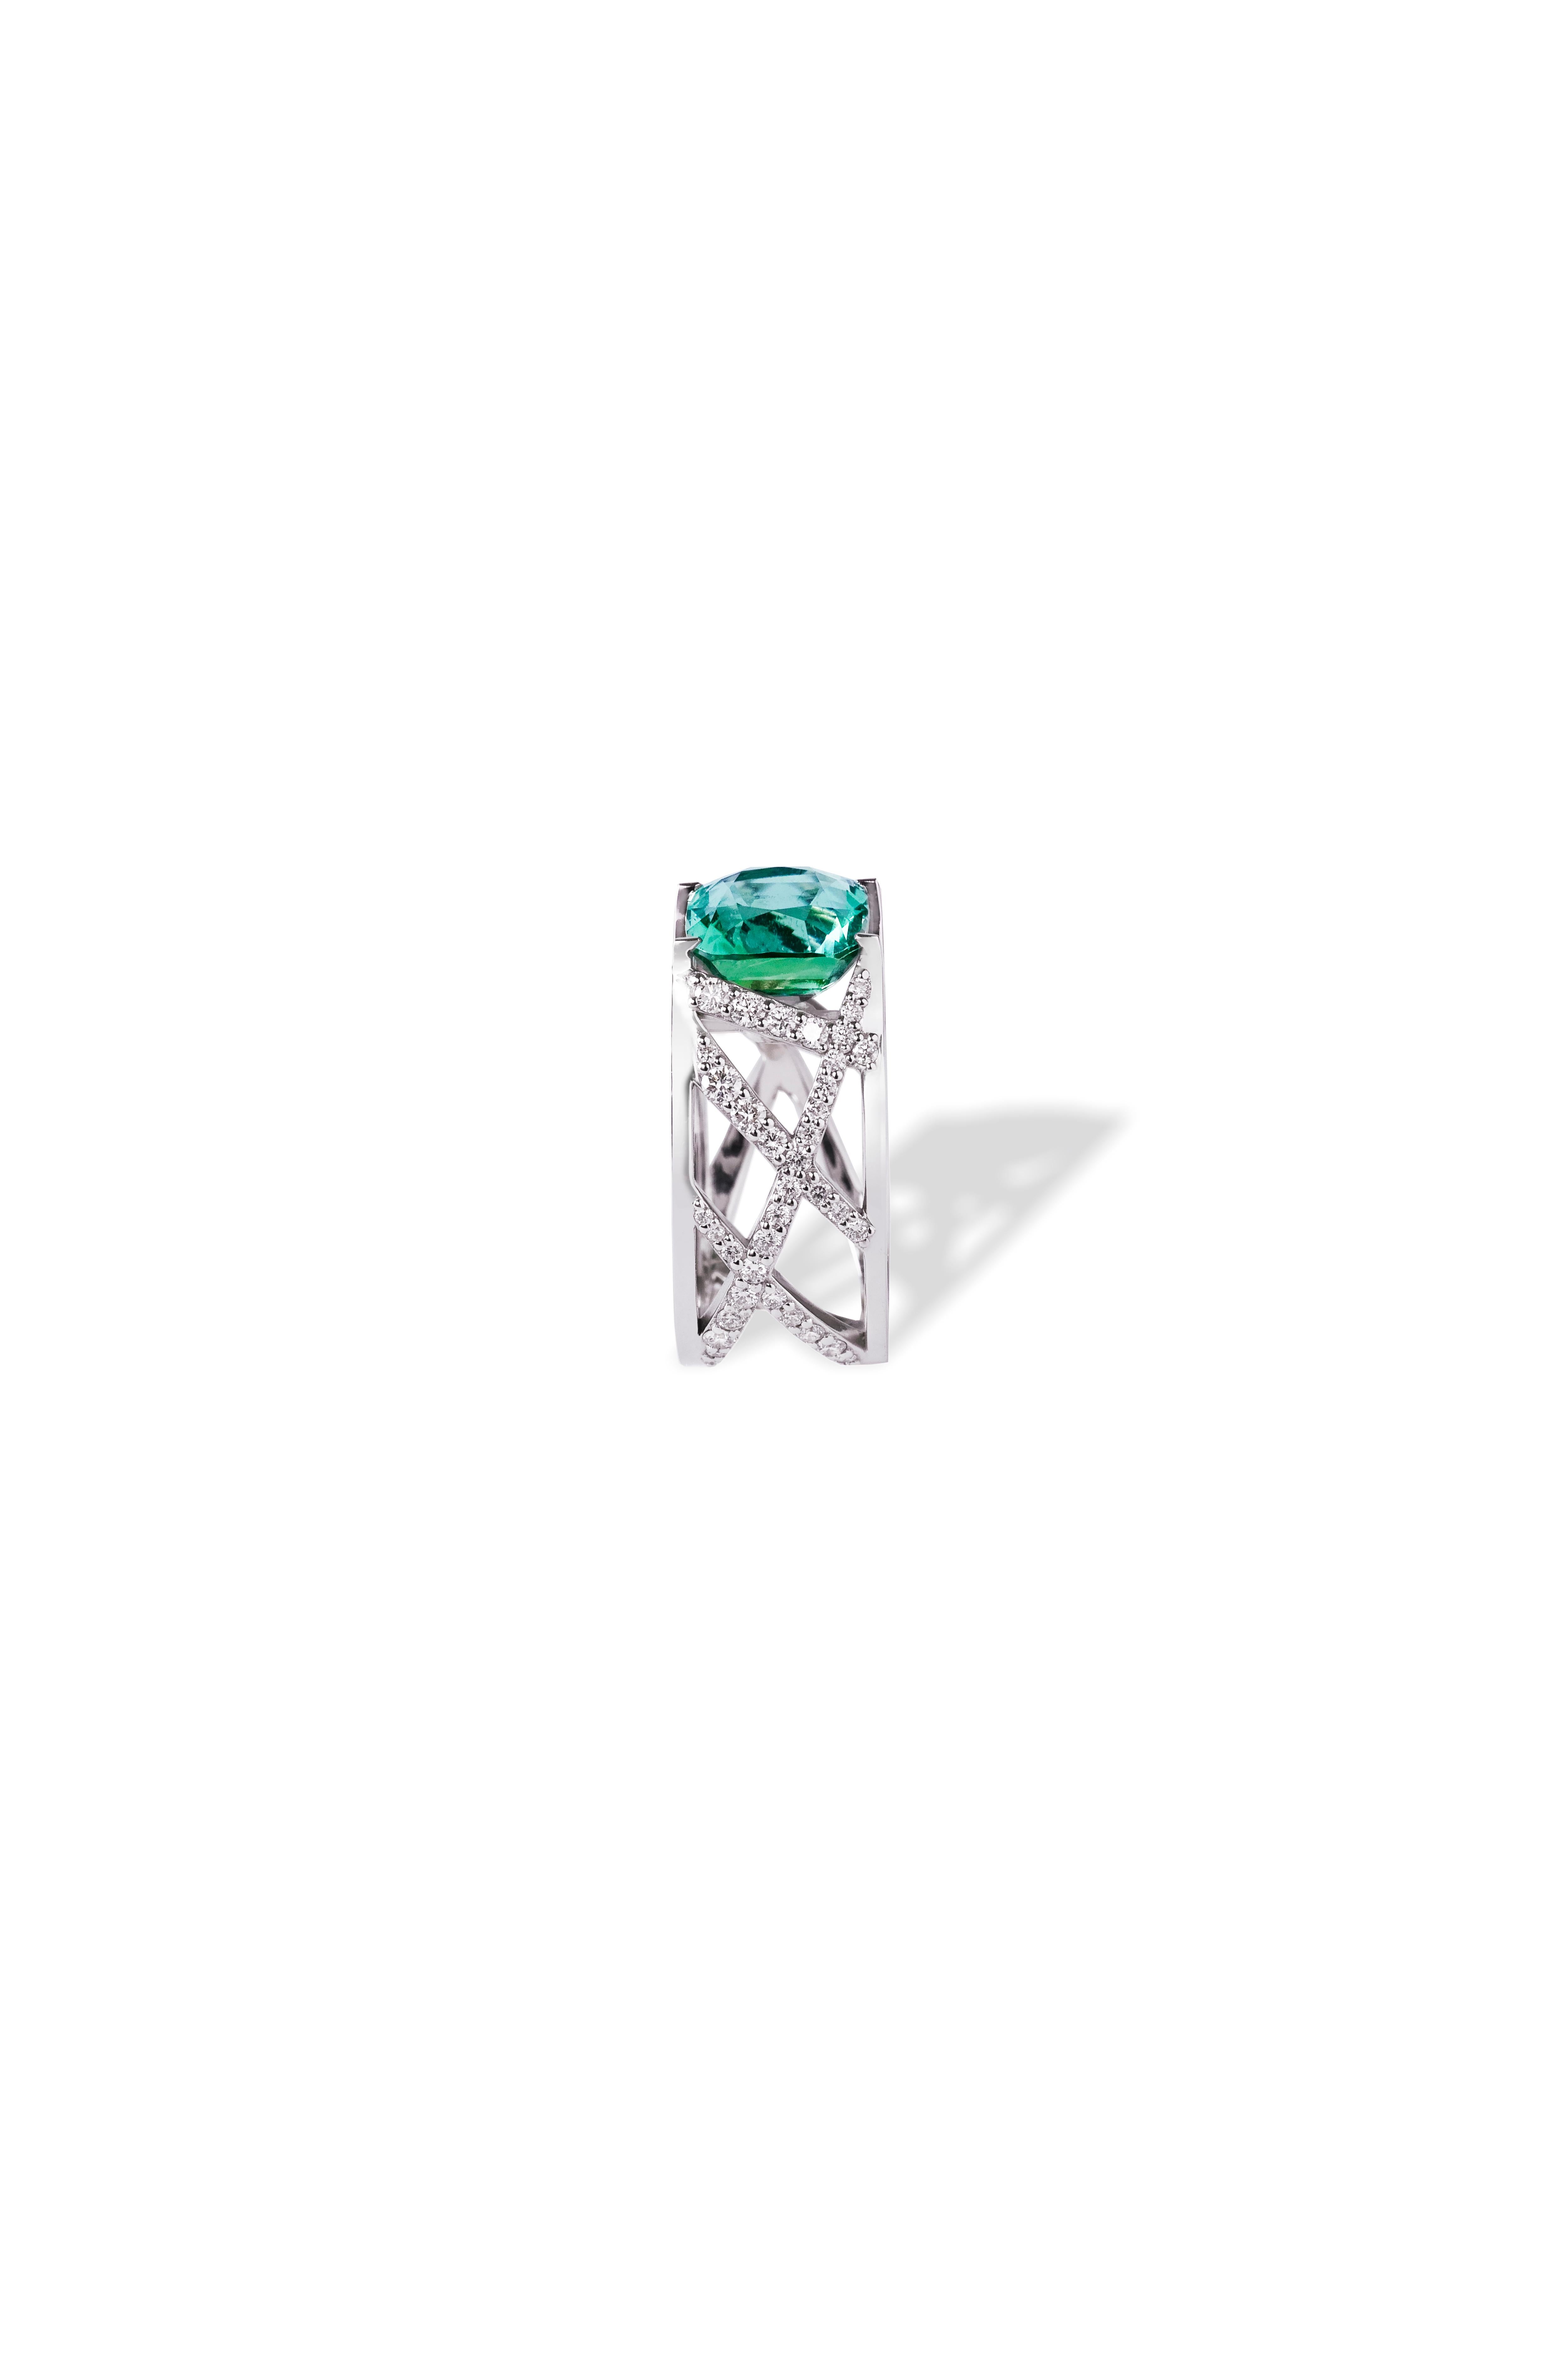 This ring is made to order only. Completely customizable. Ring handcrafted in 18W gold 5.0g., handset White Diamonds 0.87 ct., Mint Tourmaline 4.05 ct. (stone size 9.25x9.25x6.87mm). 

Gemstones are natural and not treated. 

Tod’s Omotesando